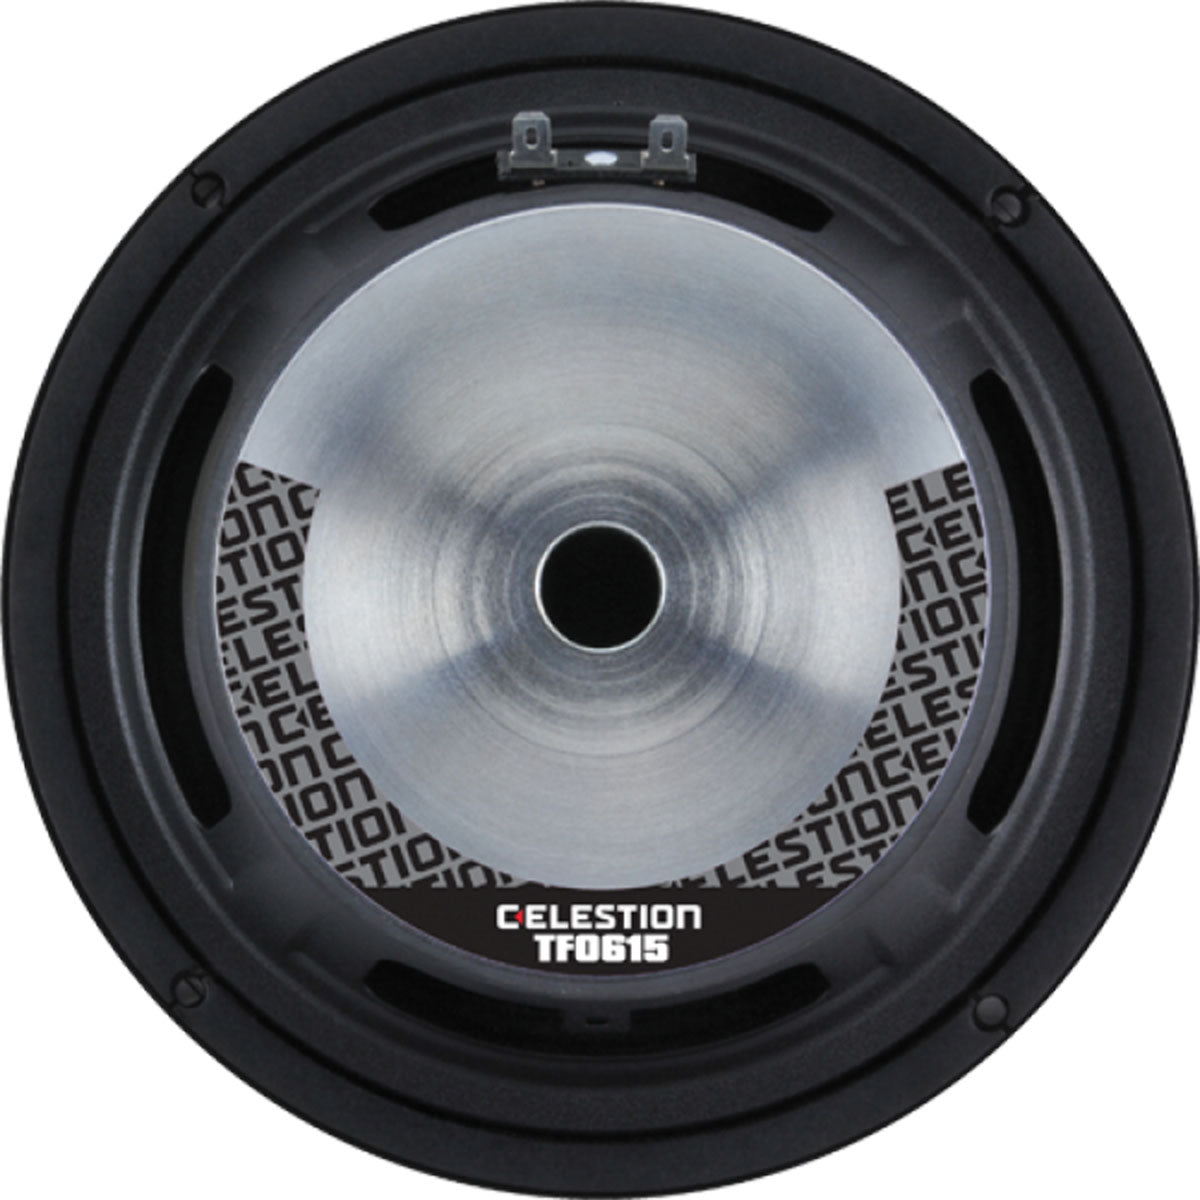 Celestion T5889 TF0615 Ferrite Magnet Steel Chassis Driver Speaker 6 Inch 100W 8OHM